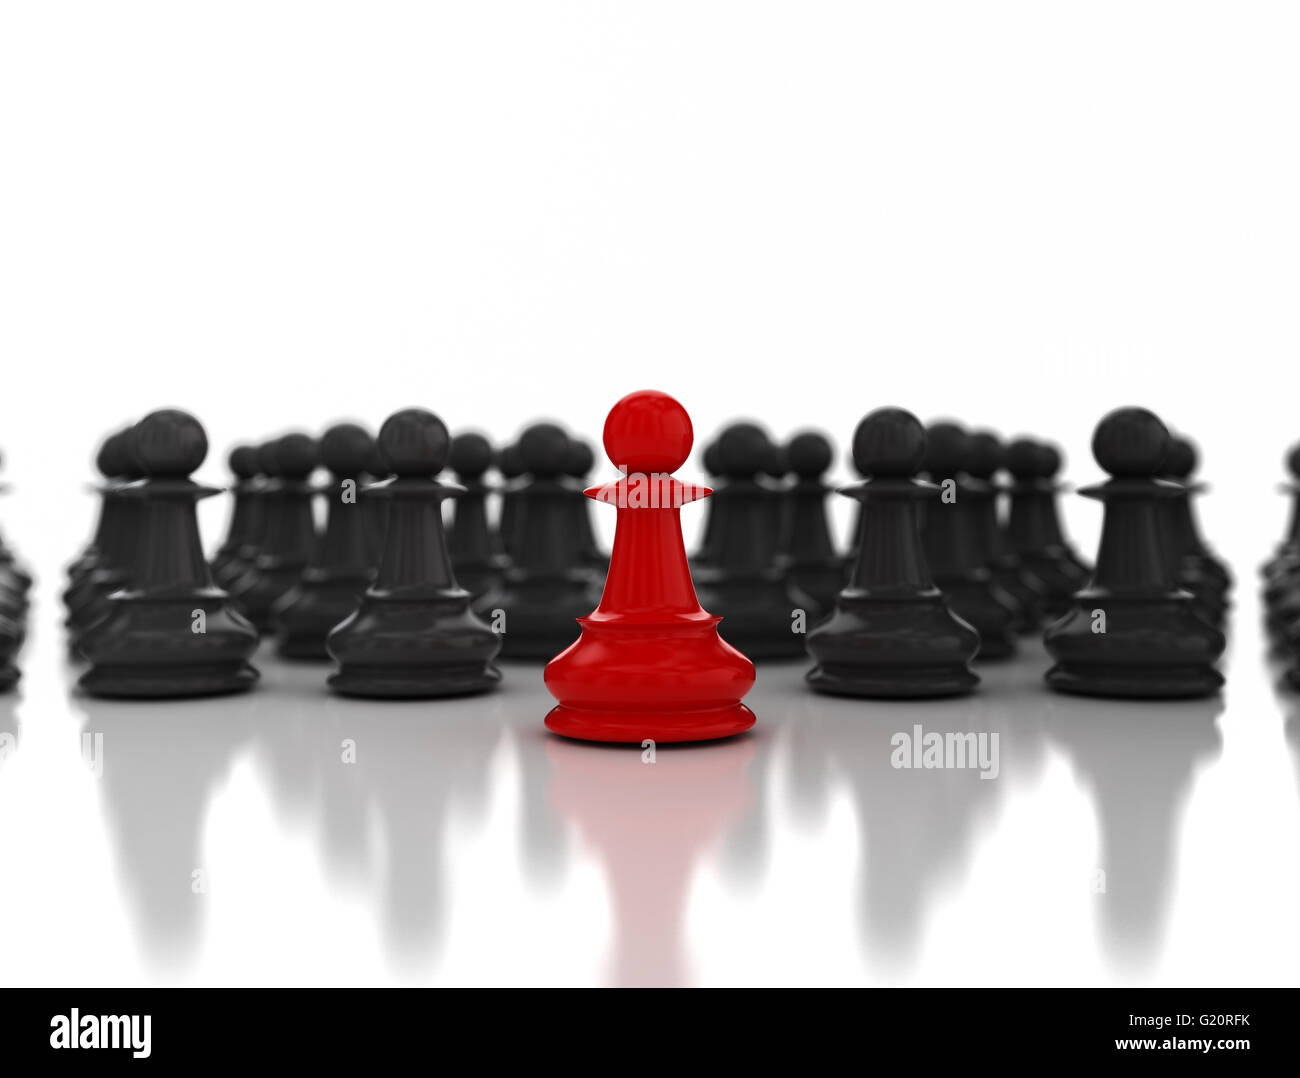 Single red pawn standing in front Stock Photo